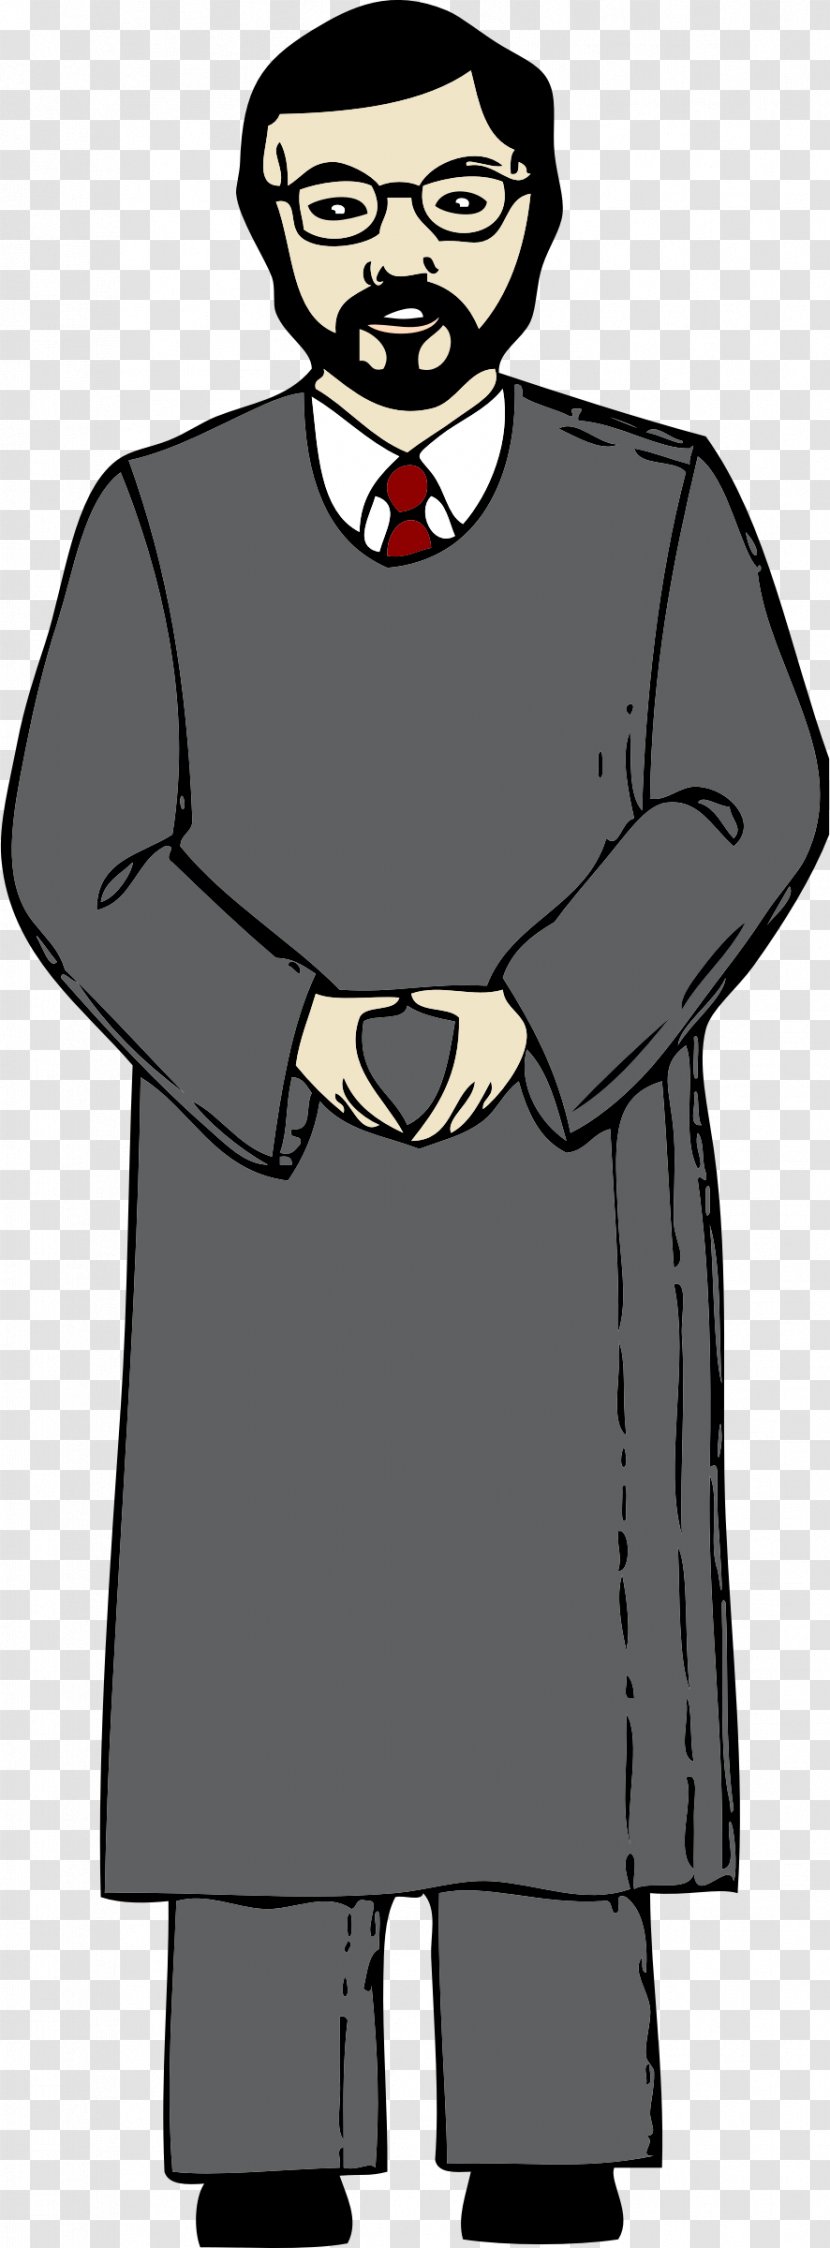 Lance Ito Judge Lawyer Clip Art - Vision Care - OLD MAN Transparent PNG